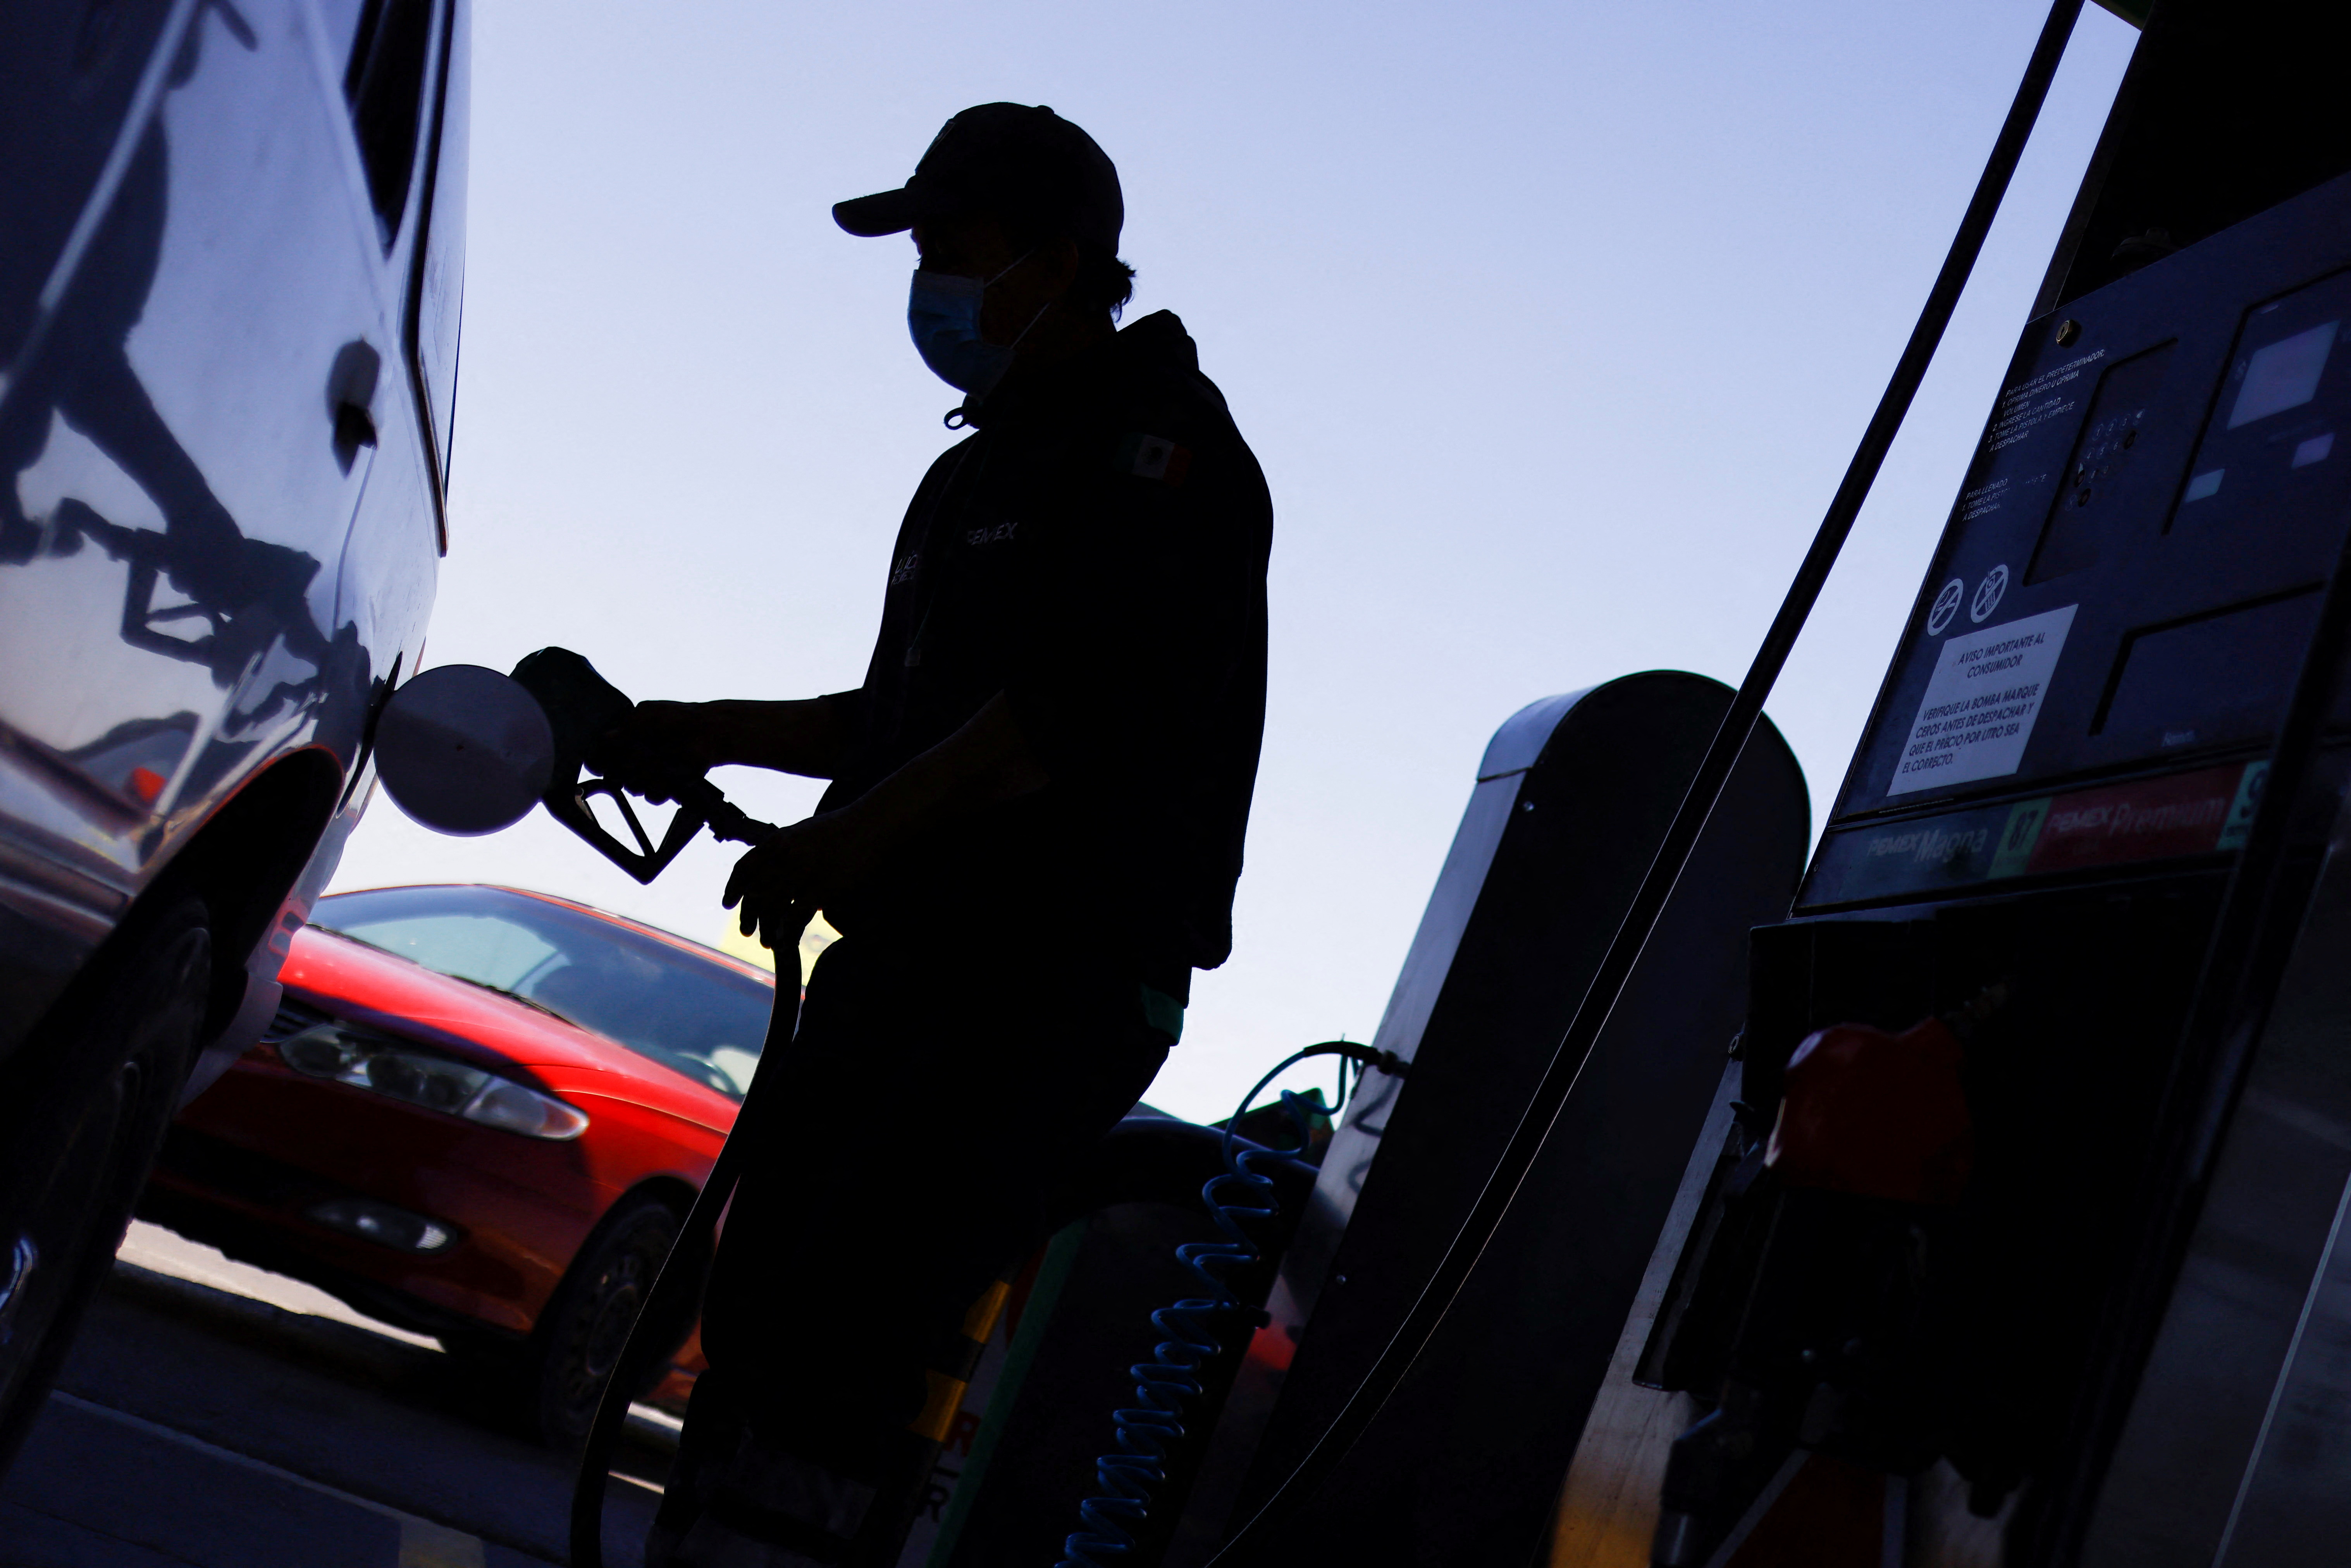 A worker fills a car with gasoline at a service station after Mexico suspended a week of gasoline subsidy along the U.S. border, in Ciudad Juarez